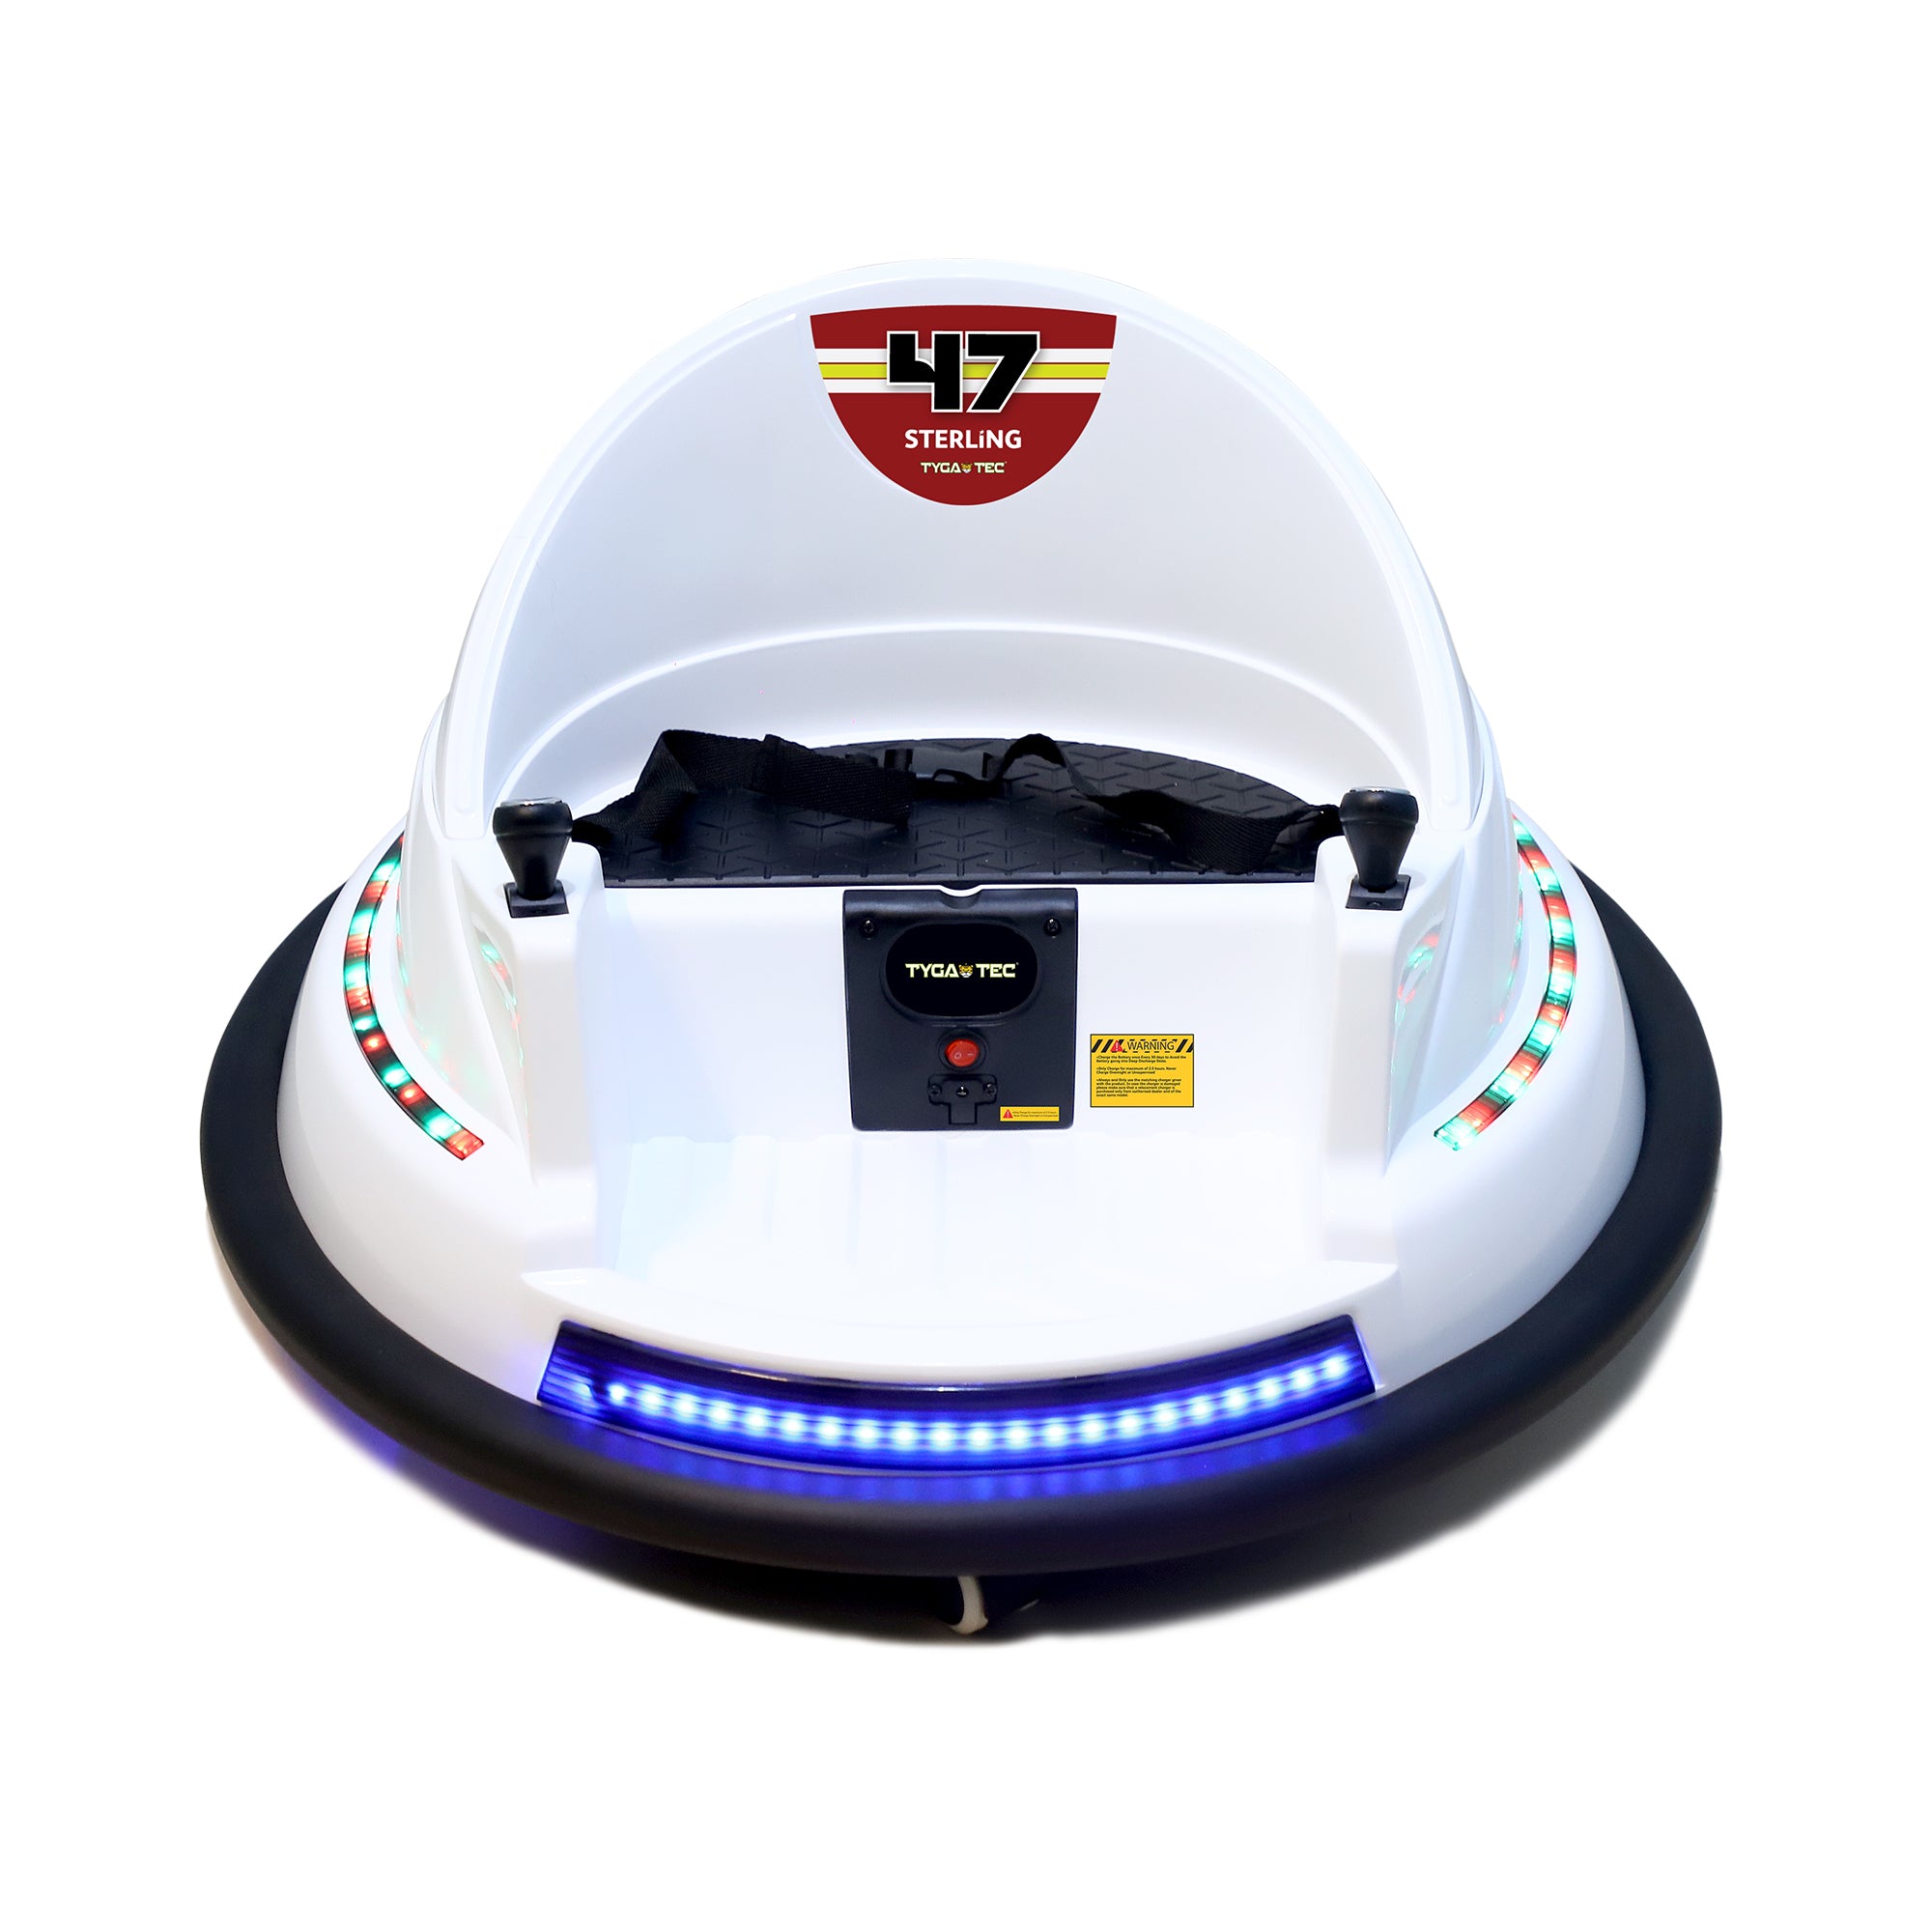 Tygatec electric Bumper Car for Kids &Toddlers with LED Lights and 360 degree Spin ( White Color )